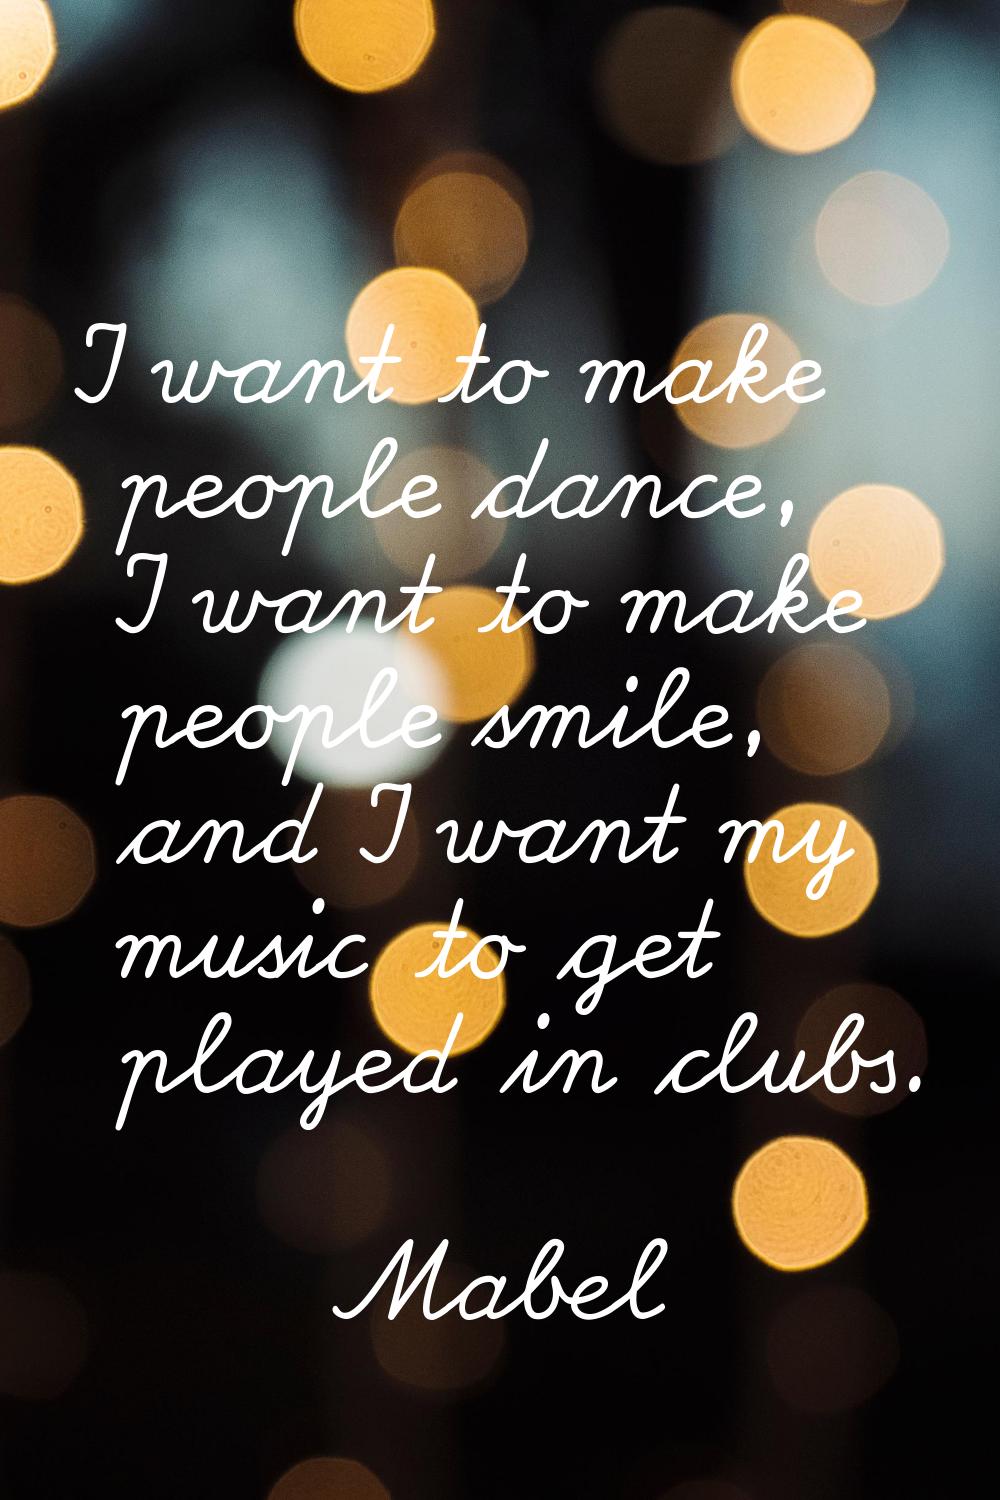 I want to make people dance, I want to make people smile, and I want my music to get played in club